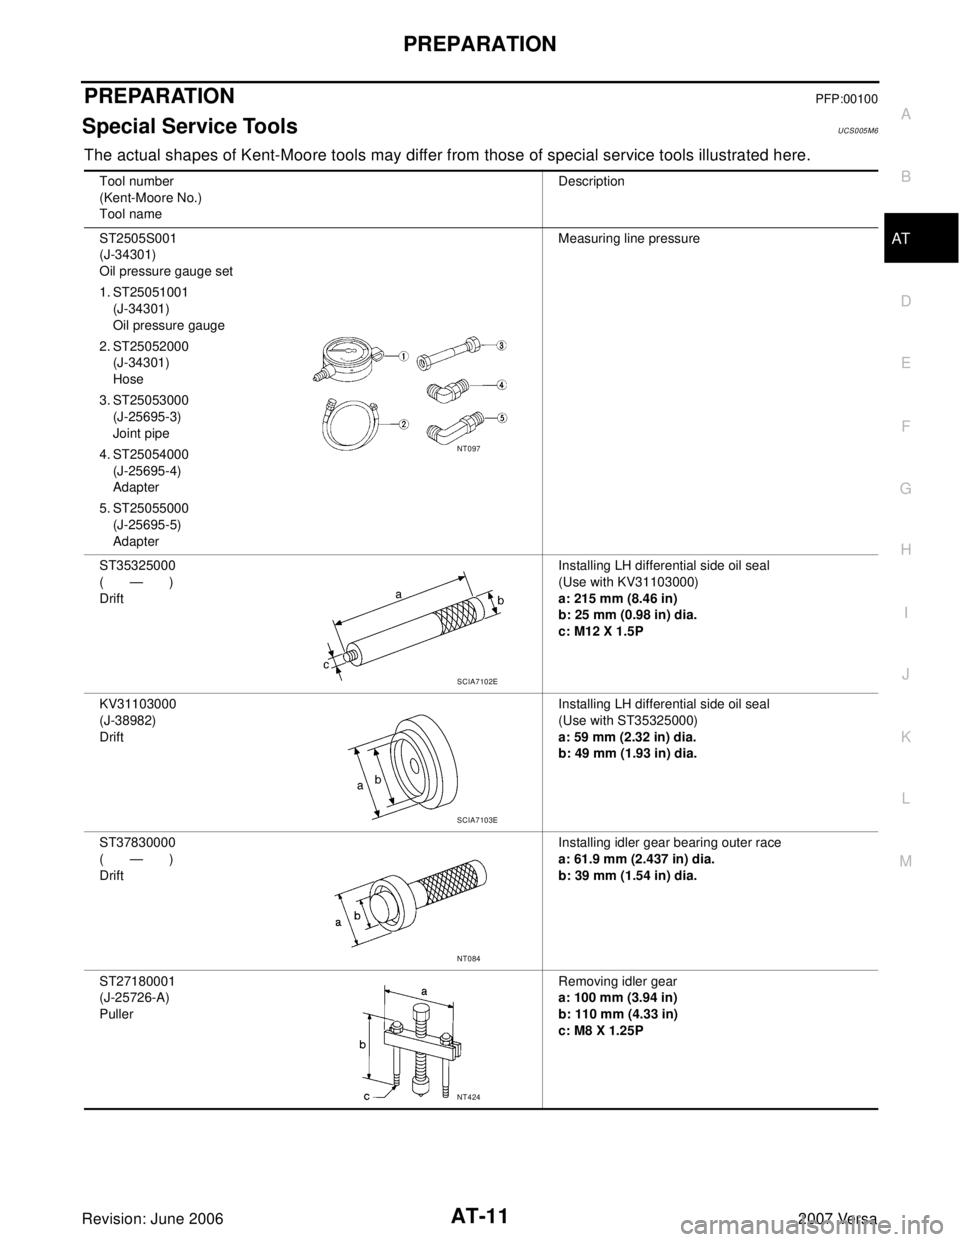 NISSAN LATIO 2007  Service Repair Manual PREPARATION
AT-11
D
E
F
G
H
I
J
K
L
MA
B
AT
Revision: June 20062007 Versa
PREPARATIONPFP:00100
Special Service ToolsUCS005M6
The actual shapes of Kent-Moore tools may differ from those of special serv